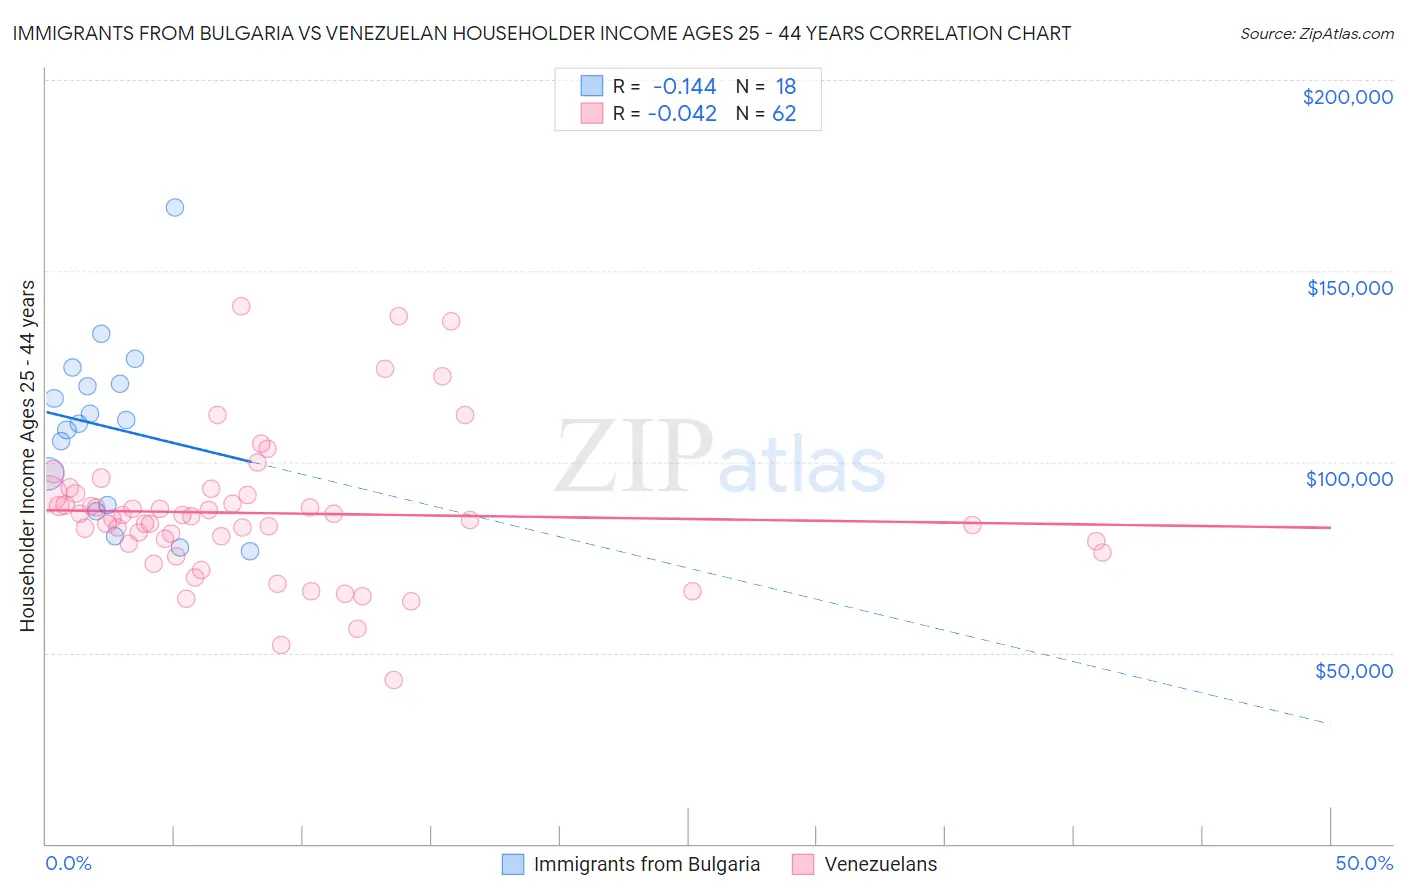 Immigrants from Bulgaria vs Venezuelan Householder Income Ages 25 - 44 years